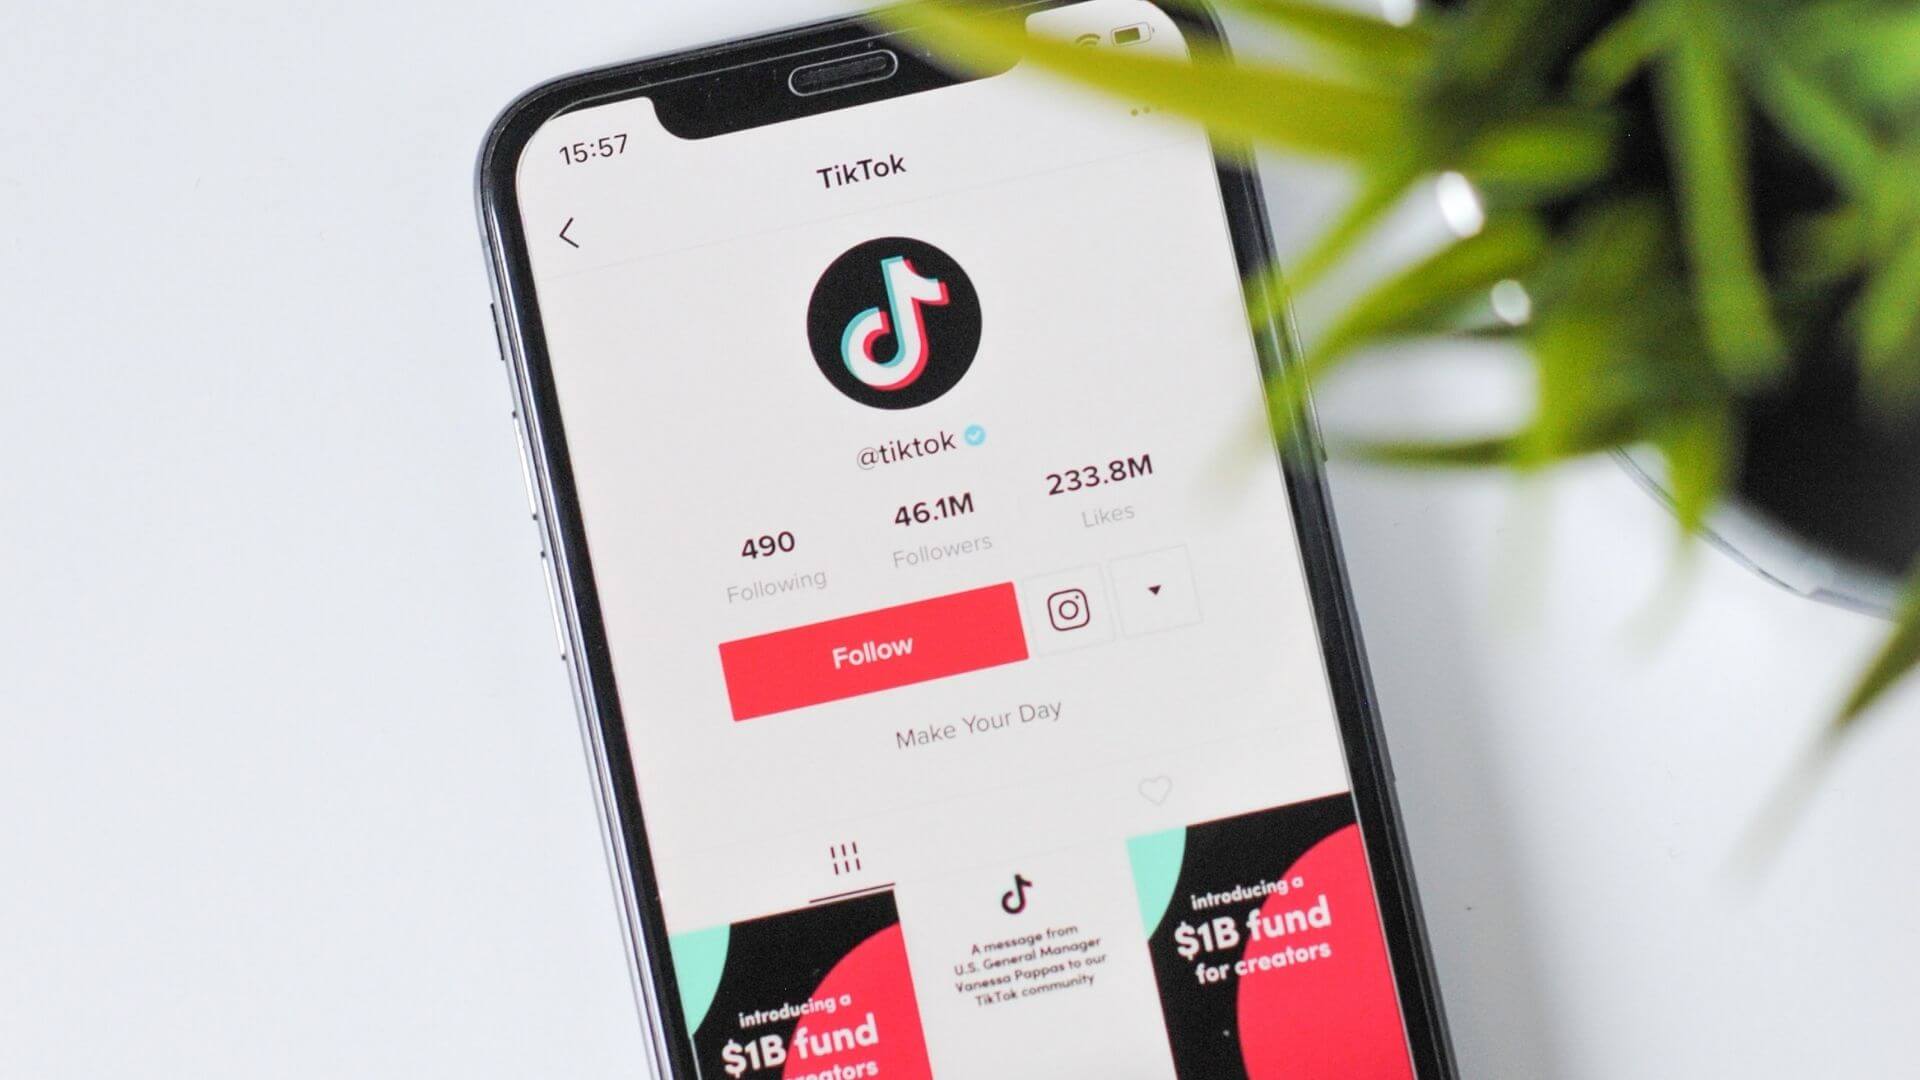 Let's Talk About How To Promote Your Business With Tiktok, Tiktok marketing, Tiktok marketing tips Missouri, business marketing tips Missouri, marketing tips for local businesses Missouri, digital marketing tips Missouri